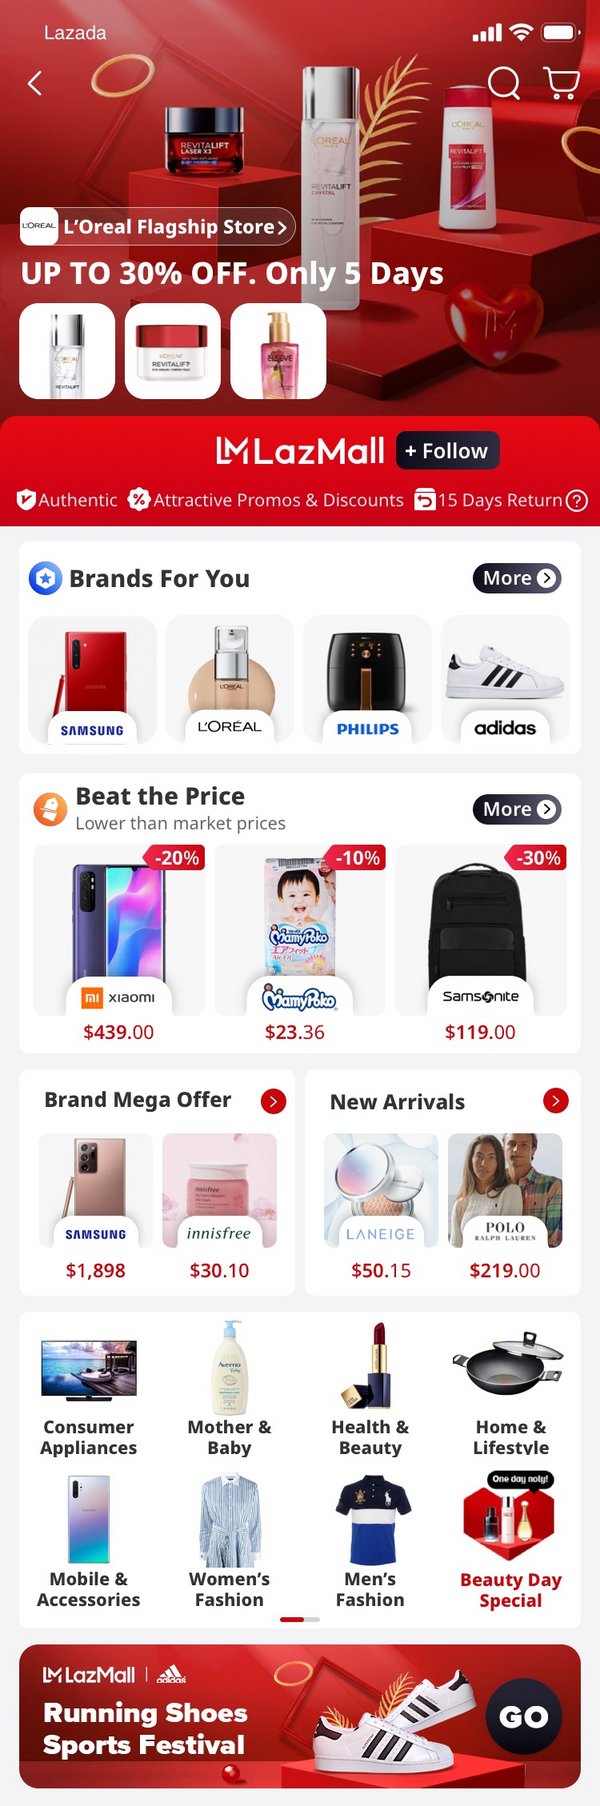 Lazada's LazMall Unveils New Features Empowering Brand Partners With Enhanced Consumer Experience and Engagement, Ahead of Annual 9.9 Shopping Festival